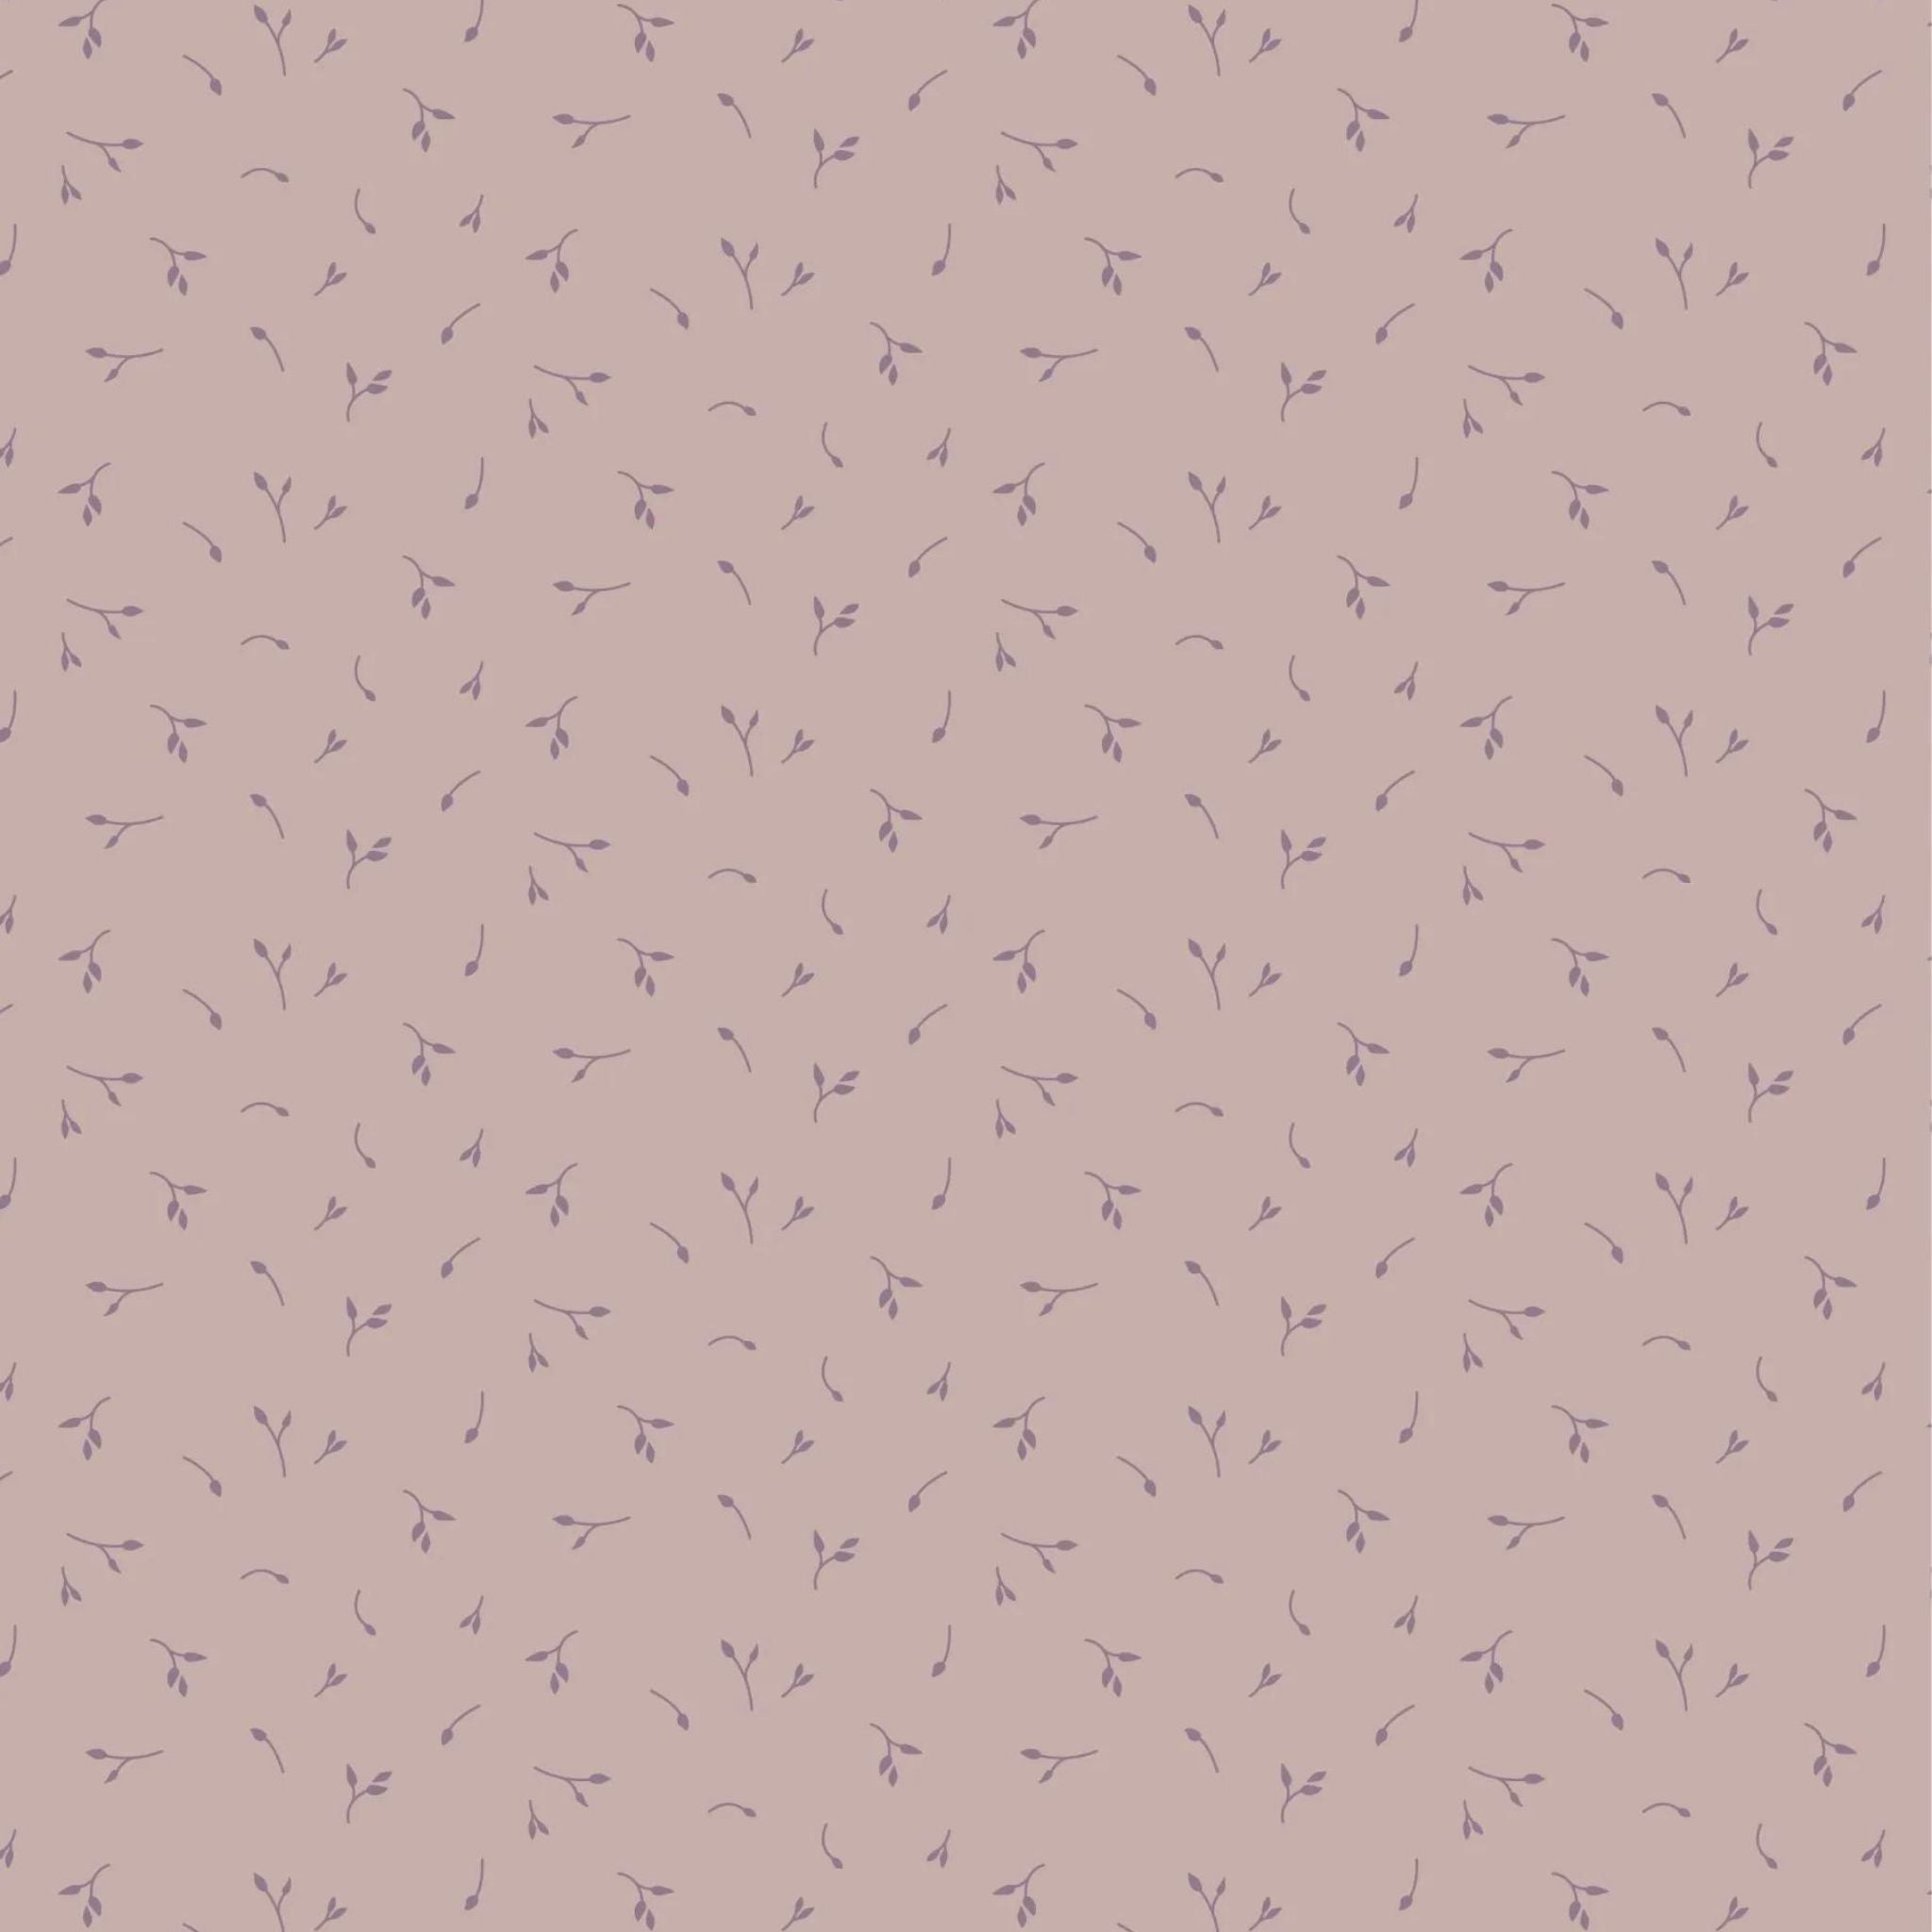 Seeds on light purple cotton fabric - Meadowside by Lewis and Irene